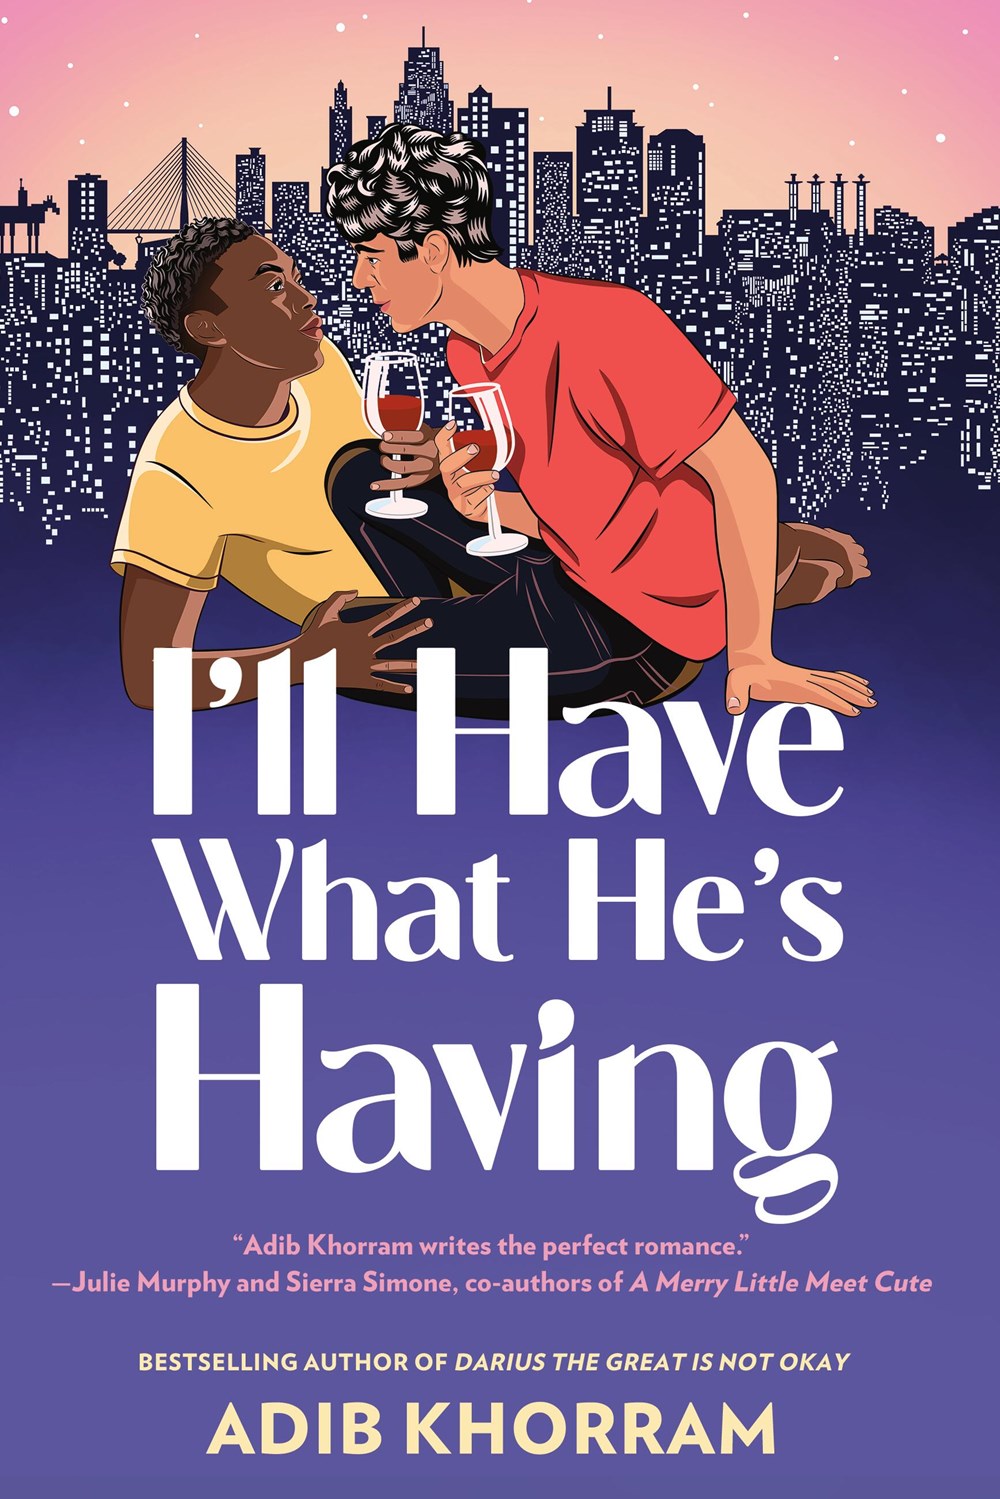 'I’ll Have What He’s Having' by Adib Khorram | Romance Pick of the Month